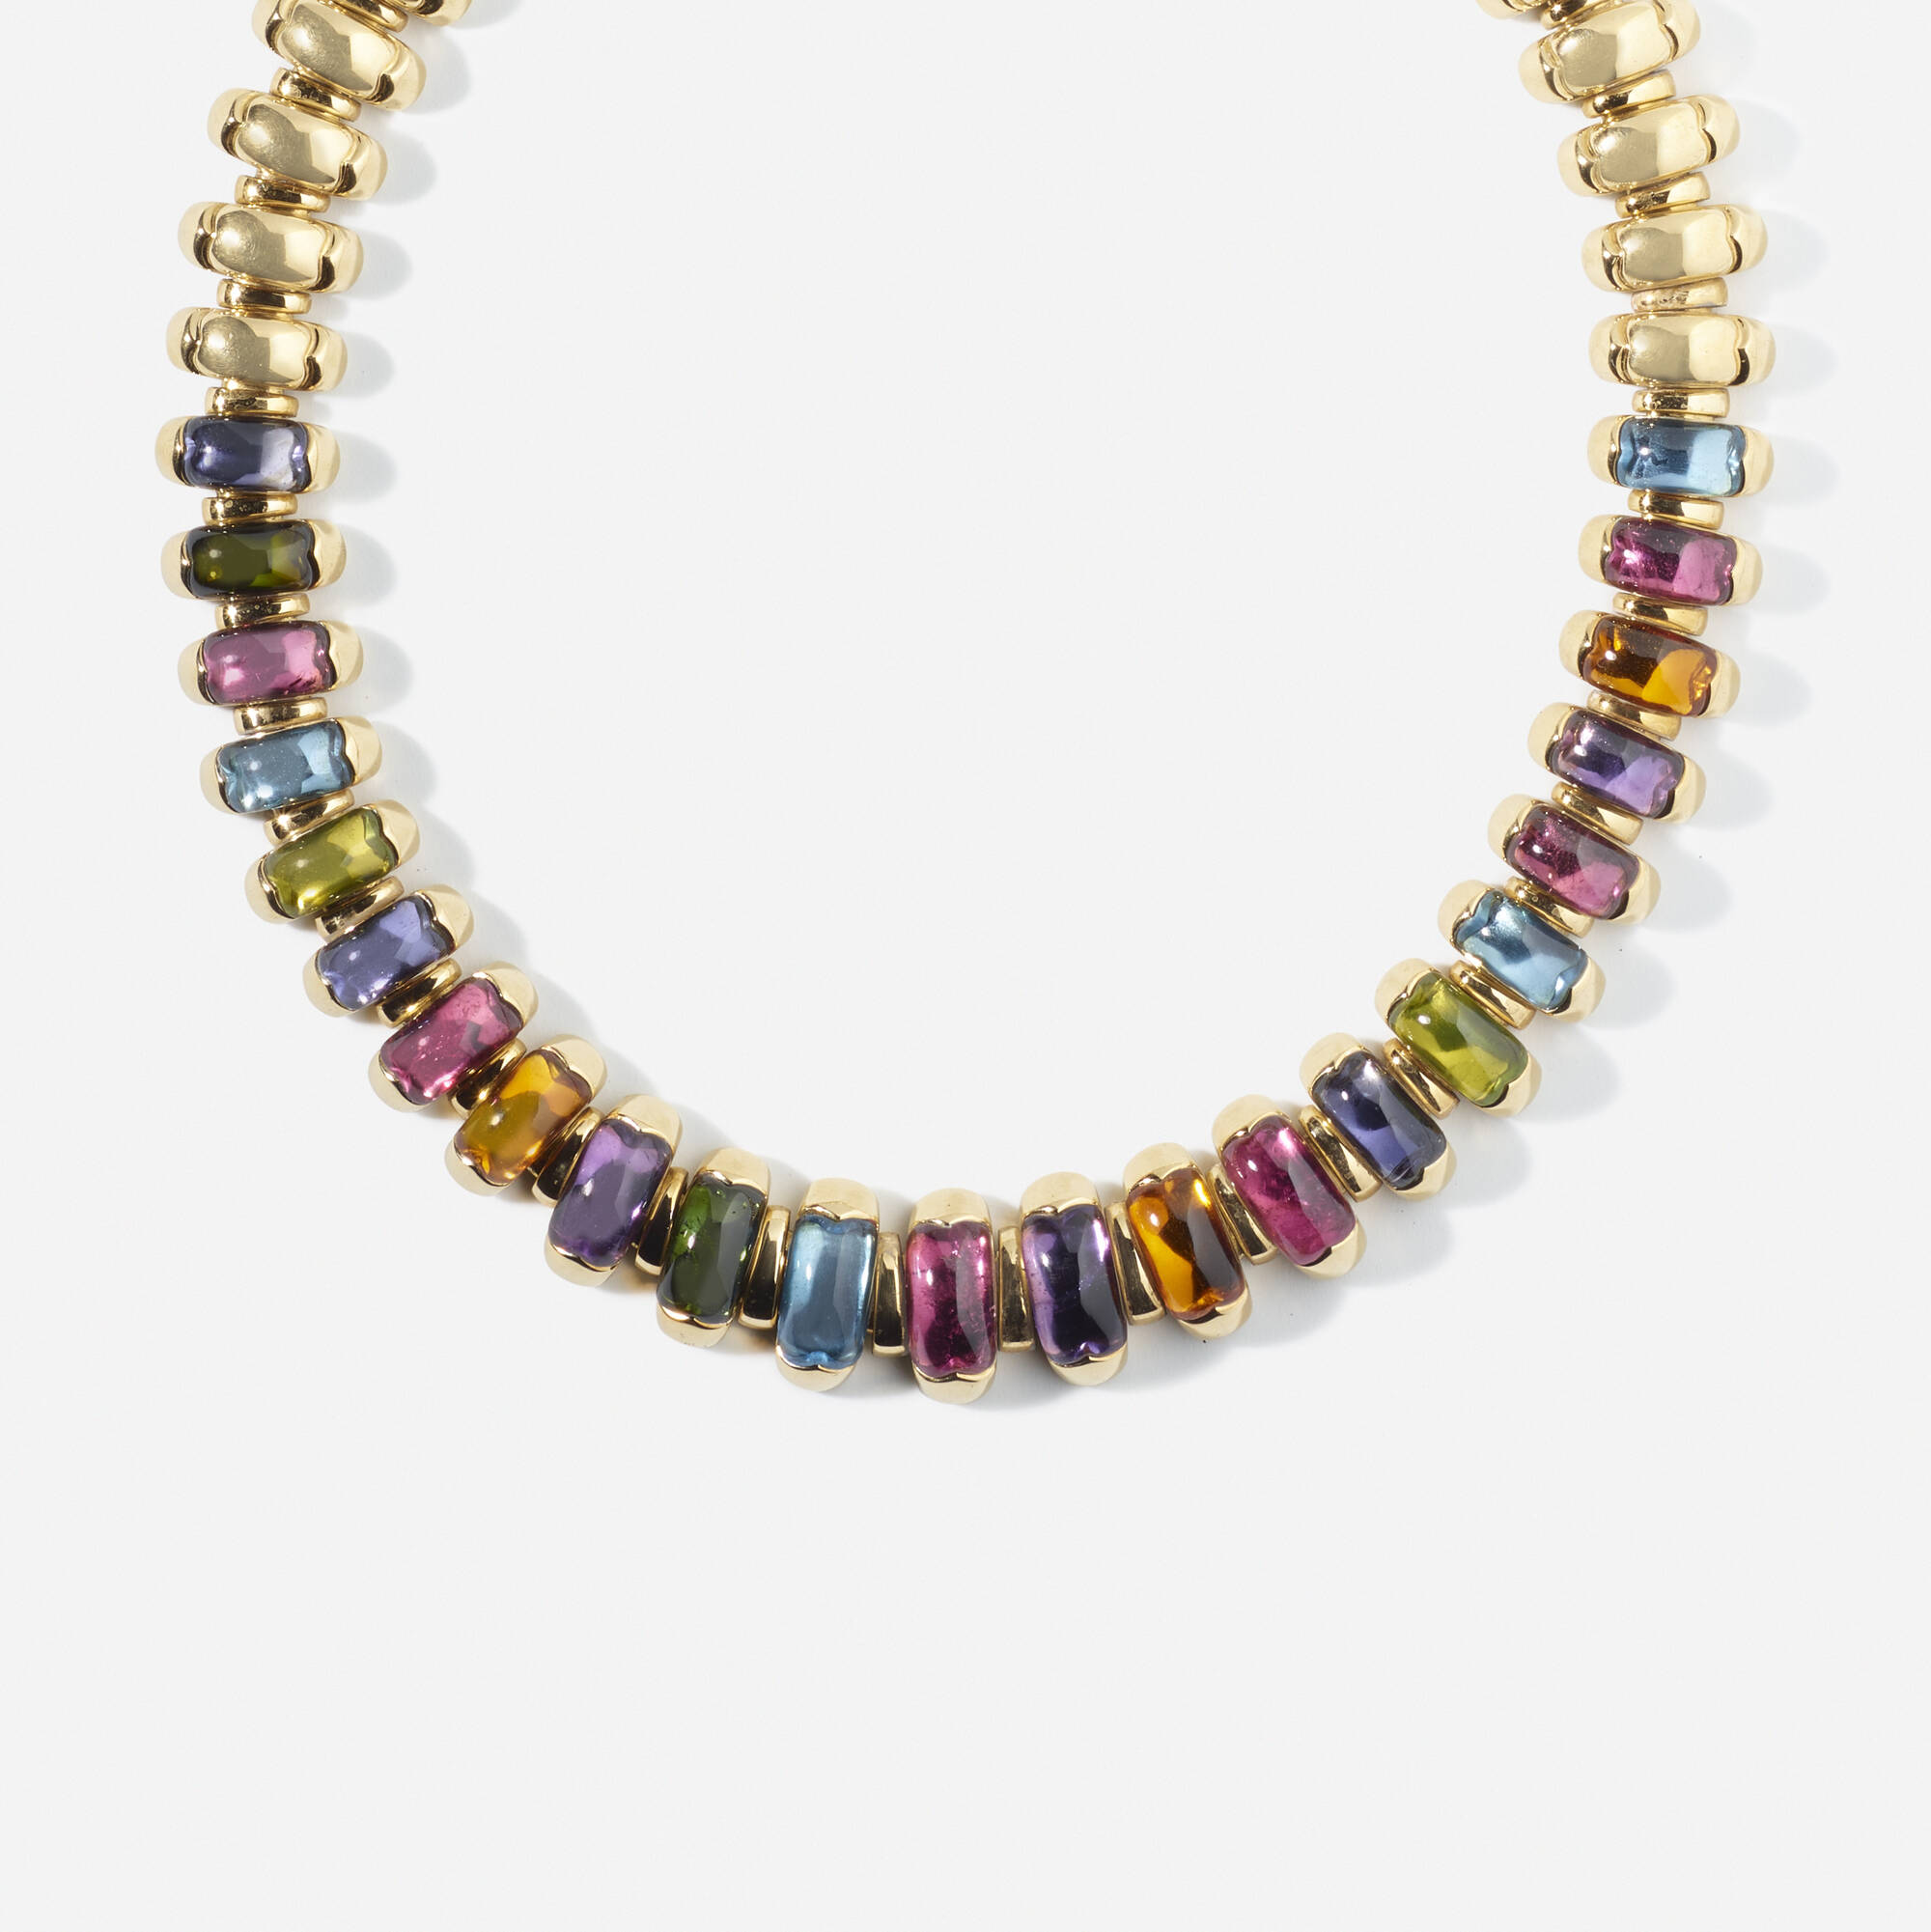 107: BULGARI, Gold and multi-gem 'Celtica' necklace < Jewels & Watches, 26  May 2021 < Auctions | Rago Auctions